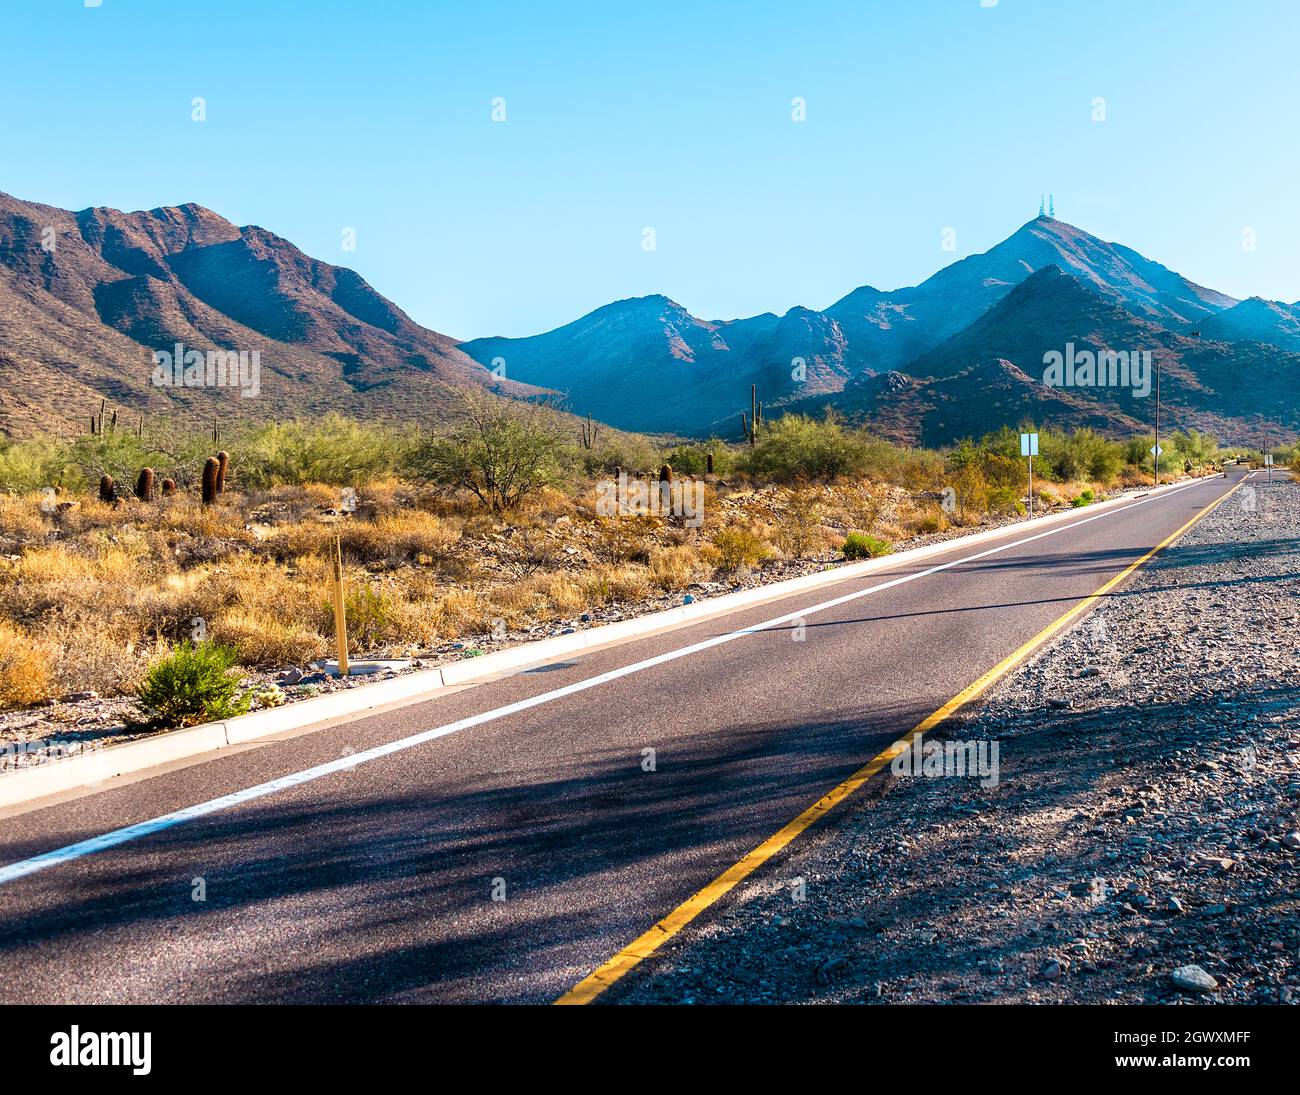 Road Leading Towards Mountains Against Clear Sky Stock Photo